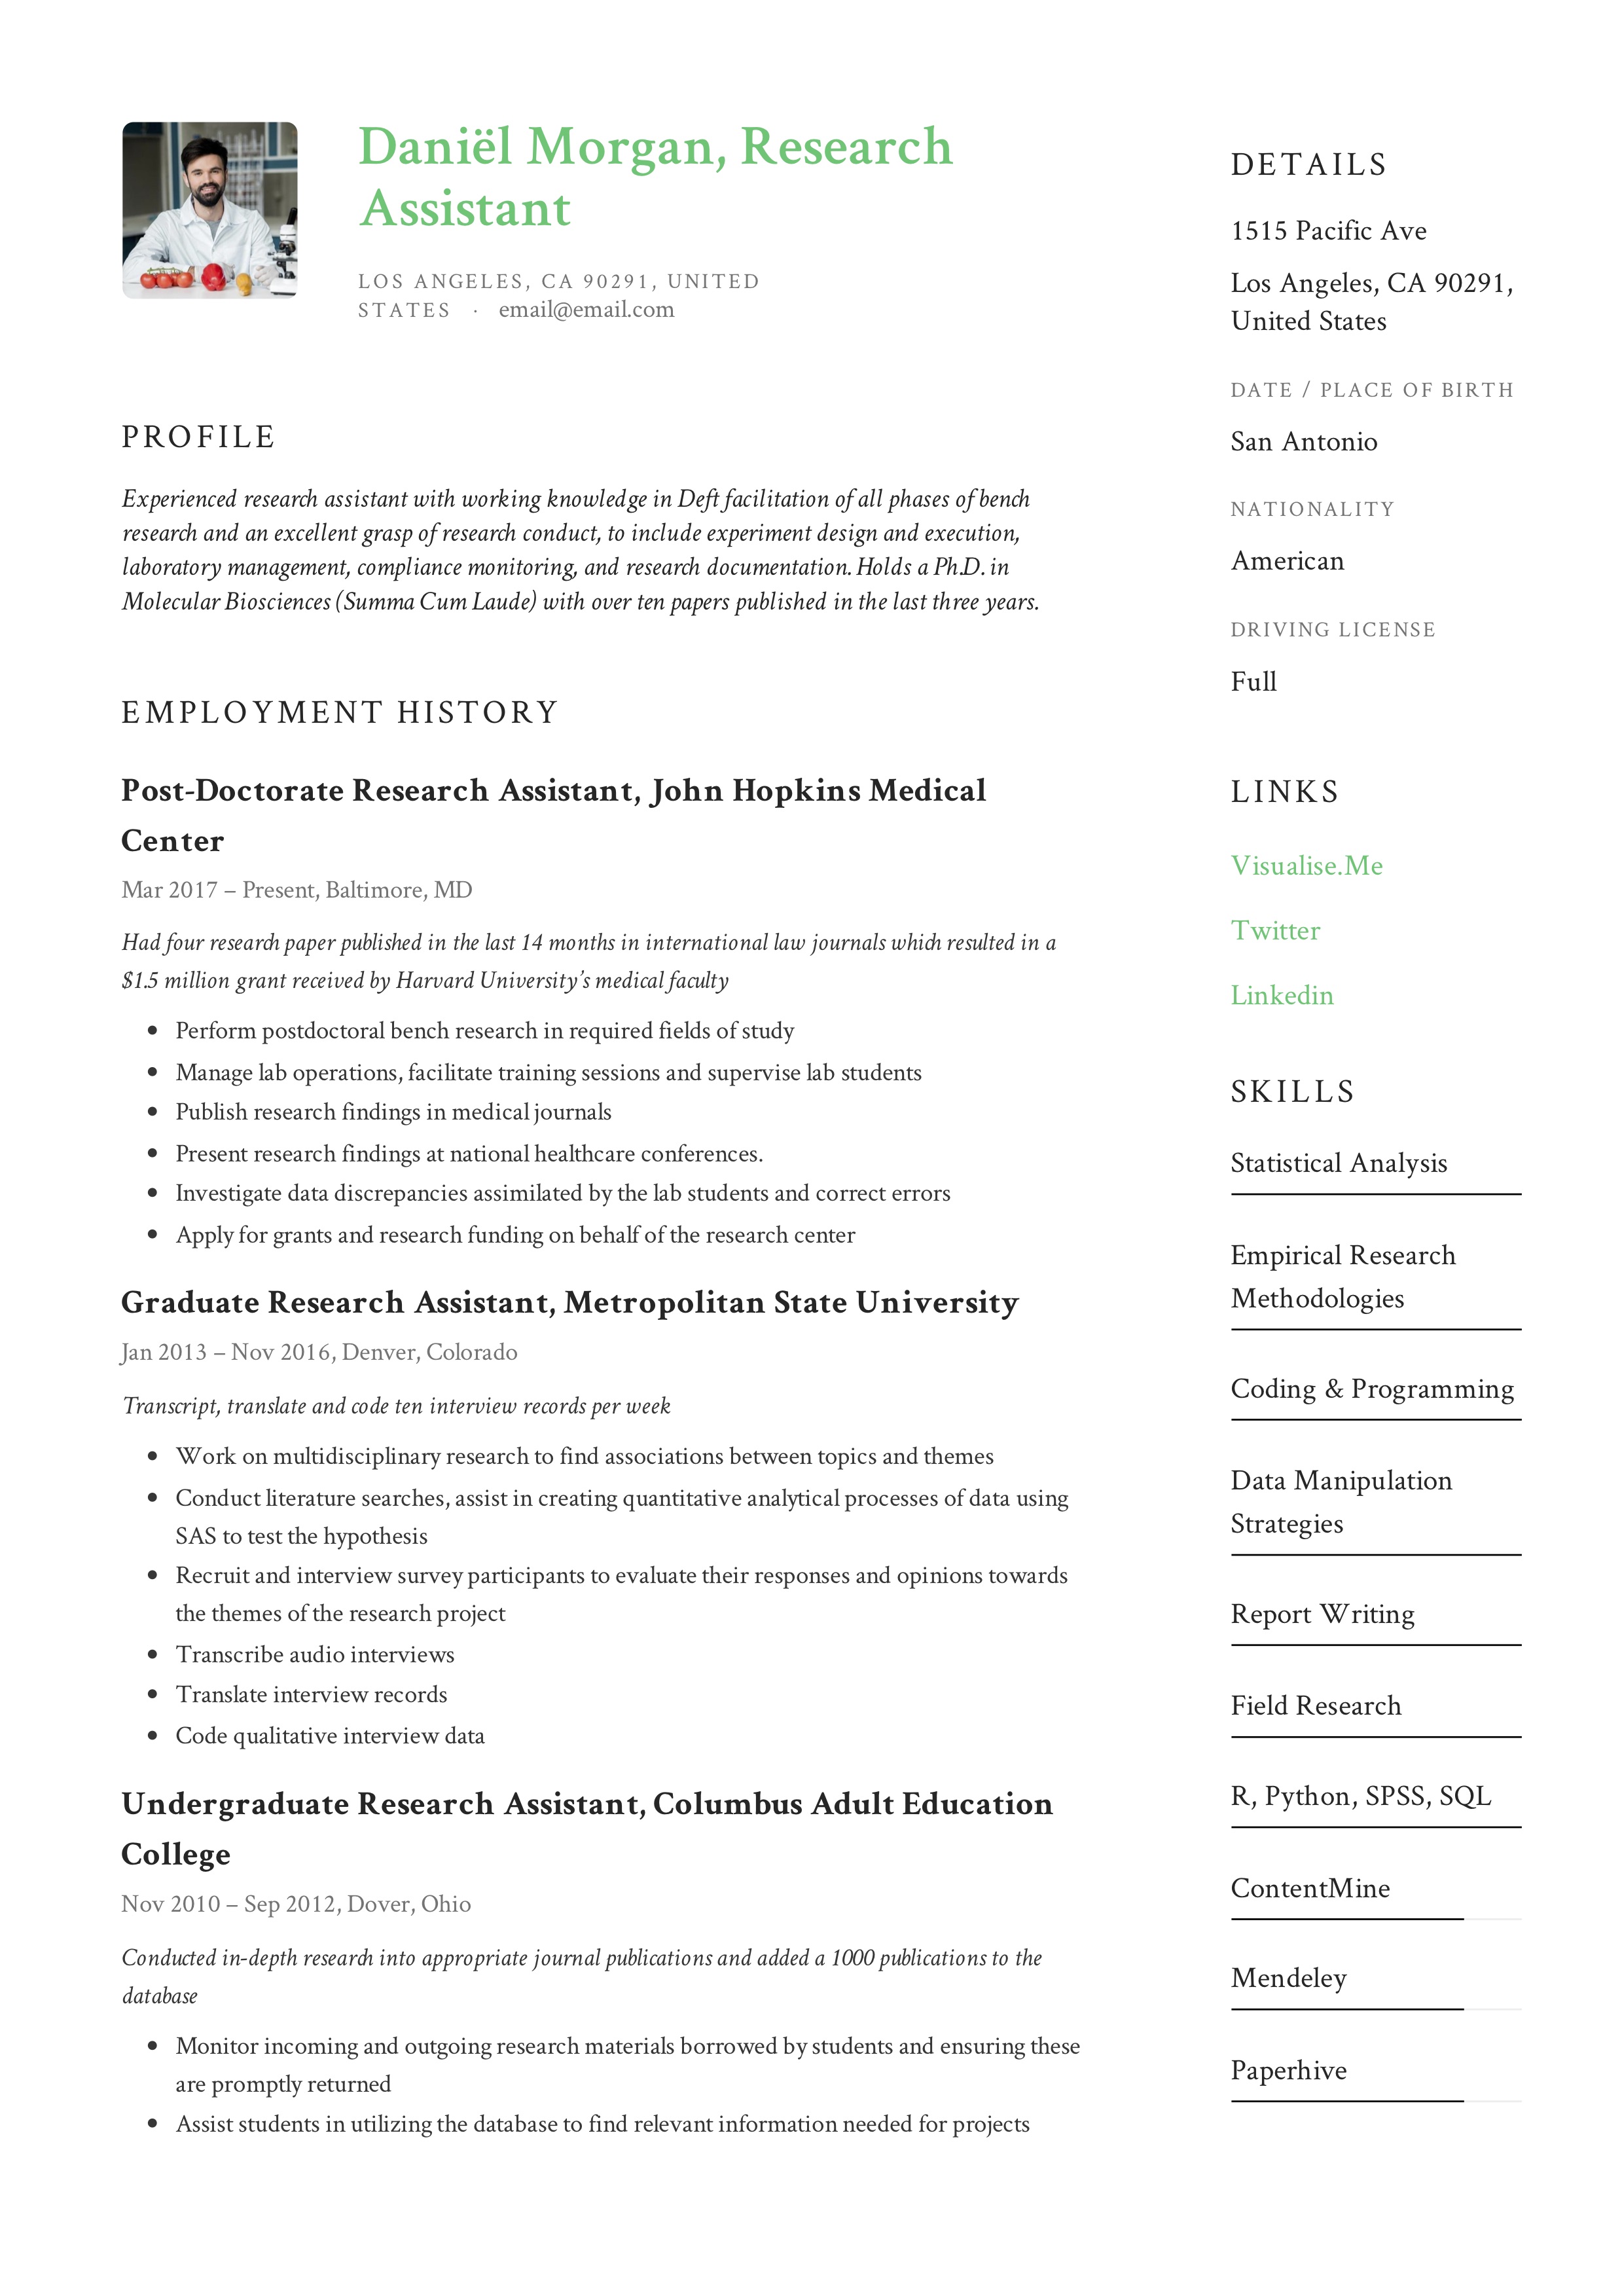 Research Assistant Example Resume